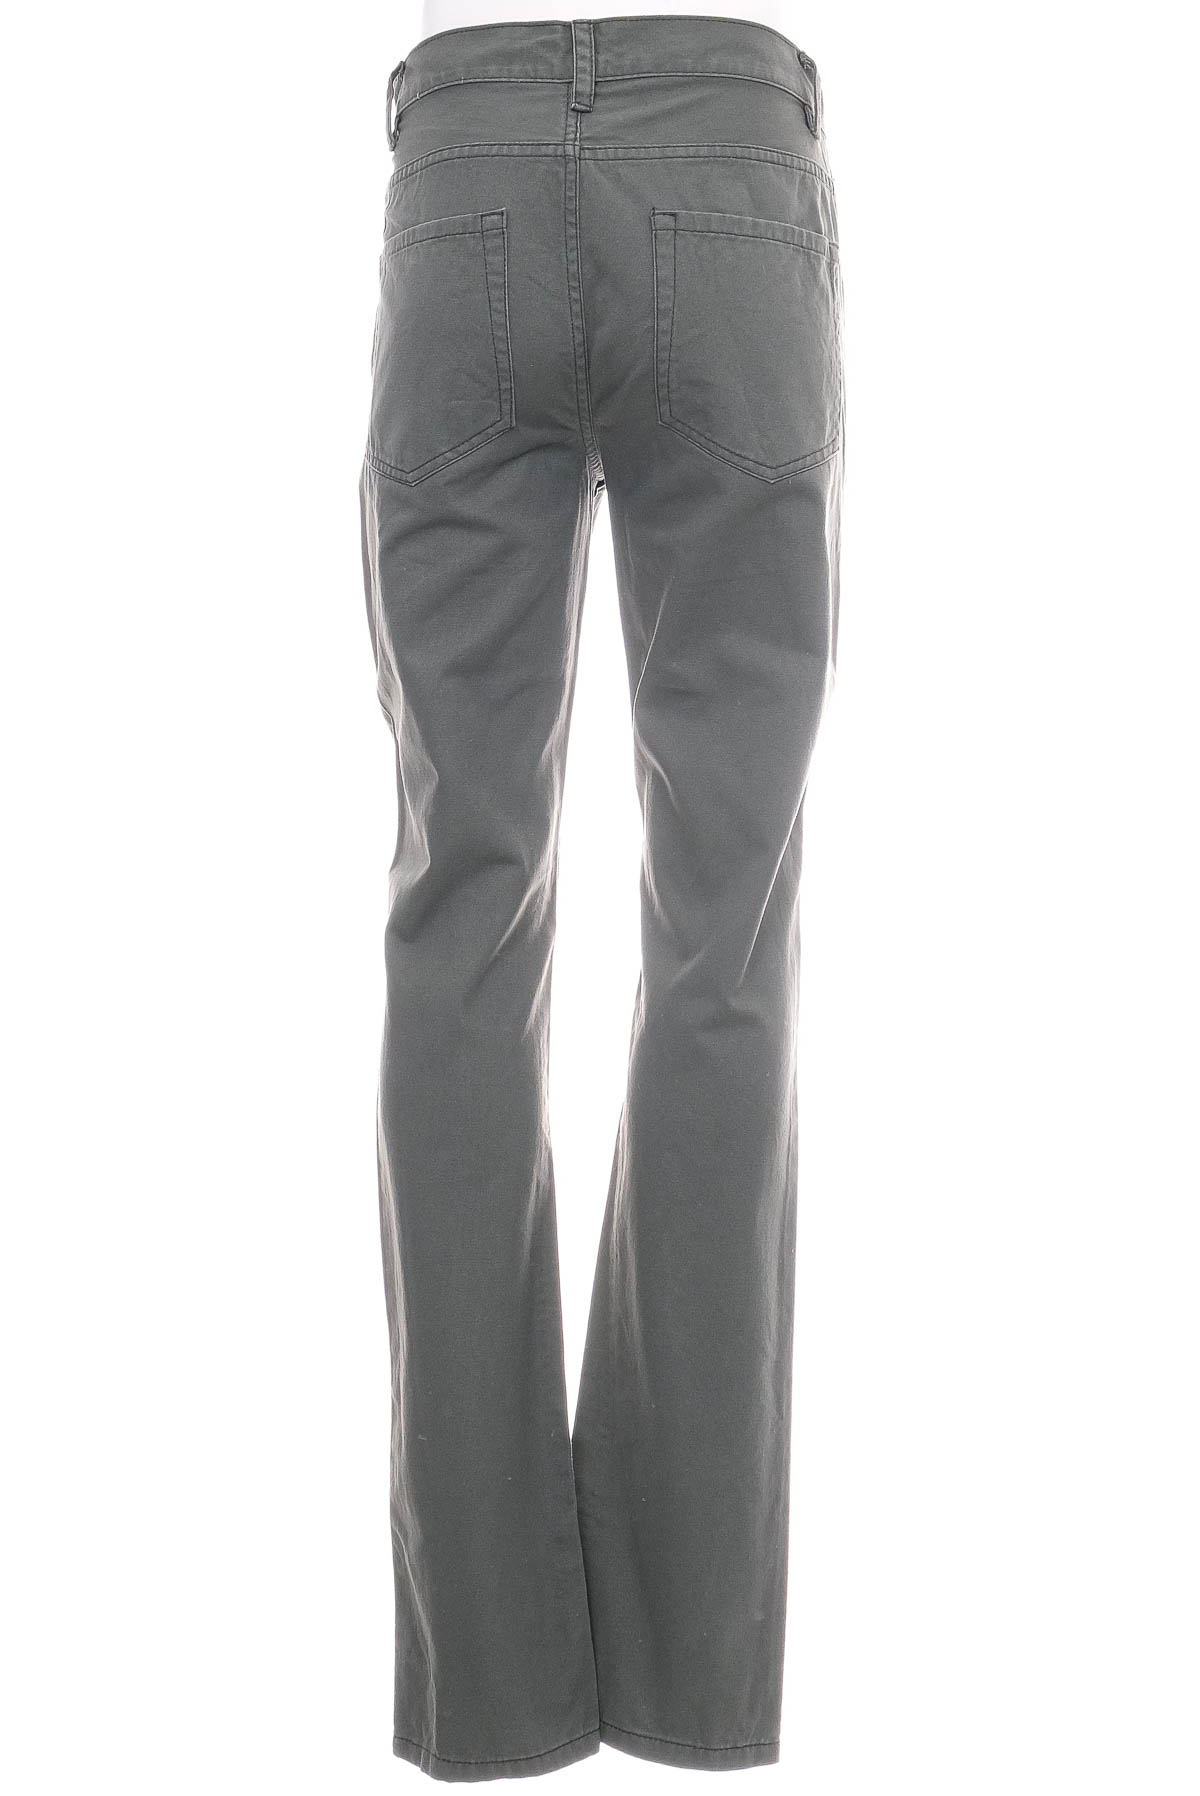 Men's trousers - Straight - 1